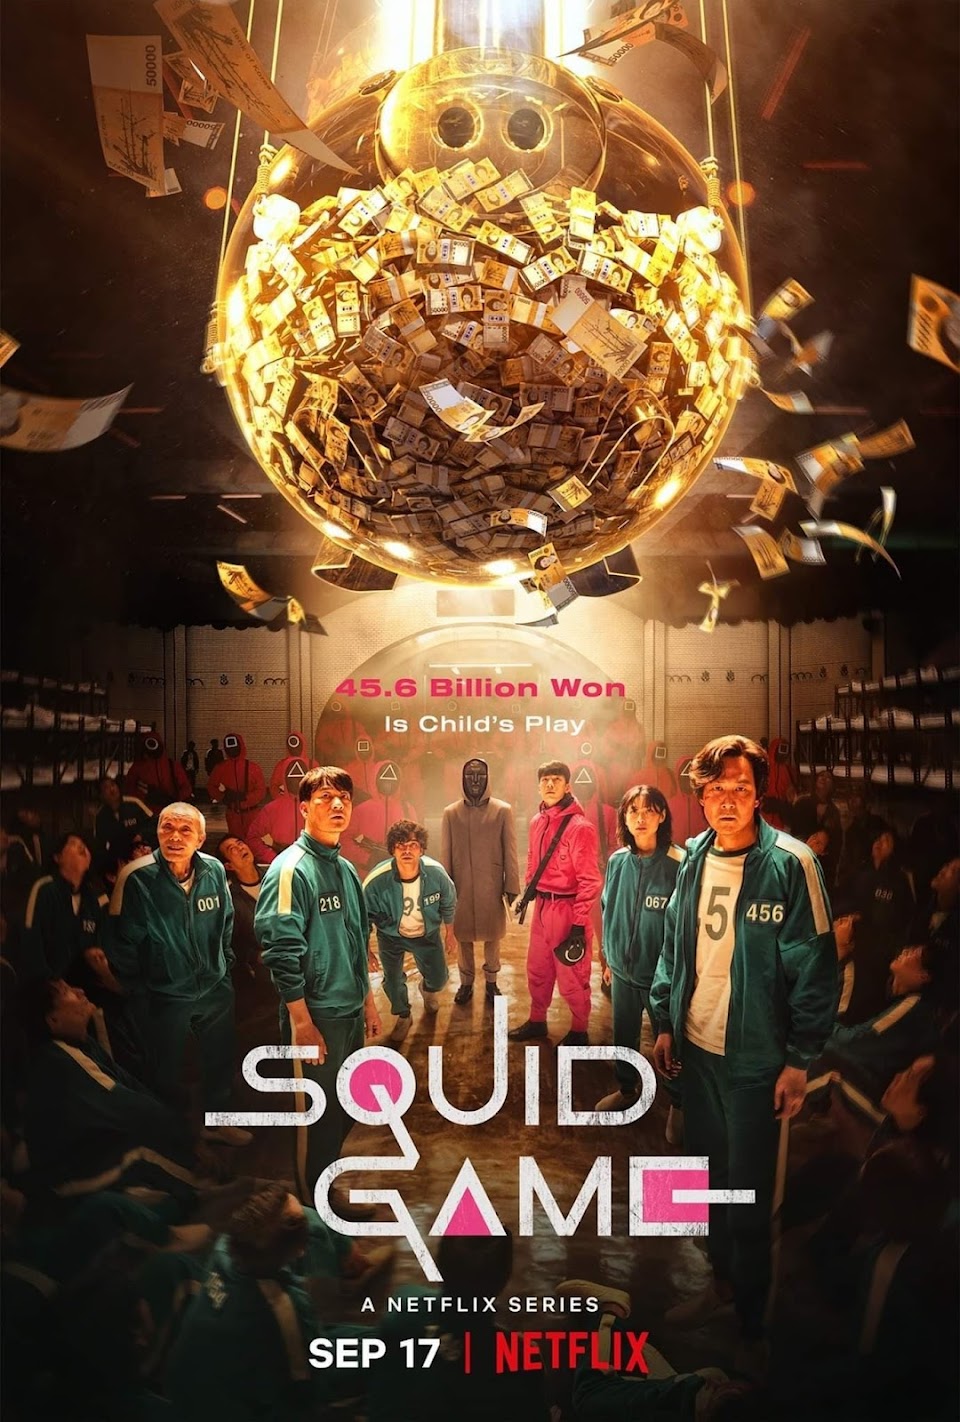 No Prize Money For Squid Game: The Challenge Winner Yet, But Season 2  Announced - Koreaboo